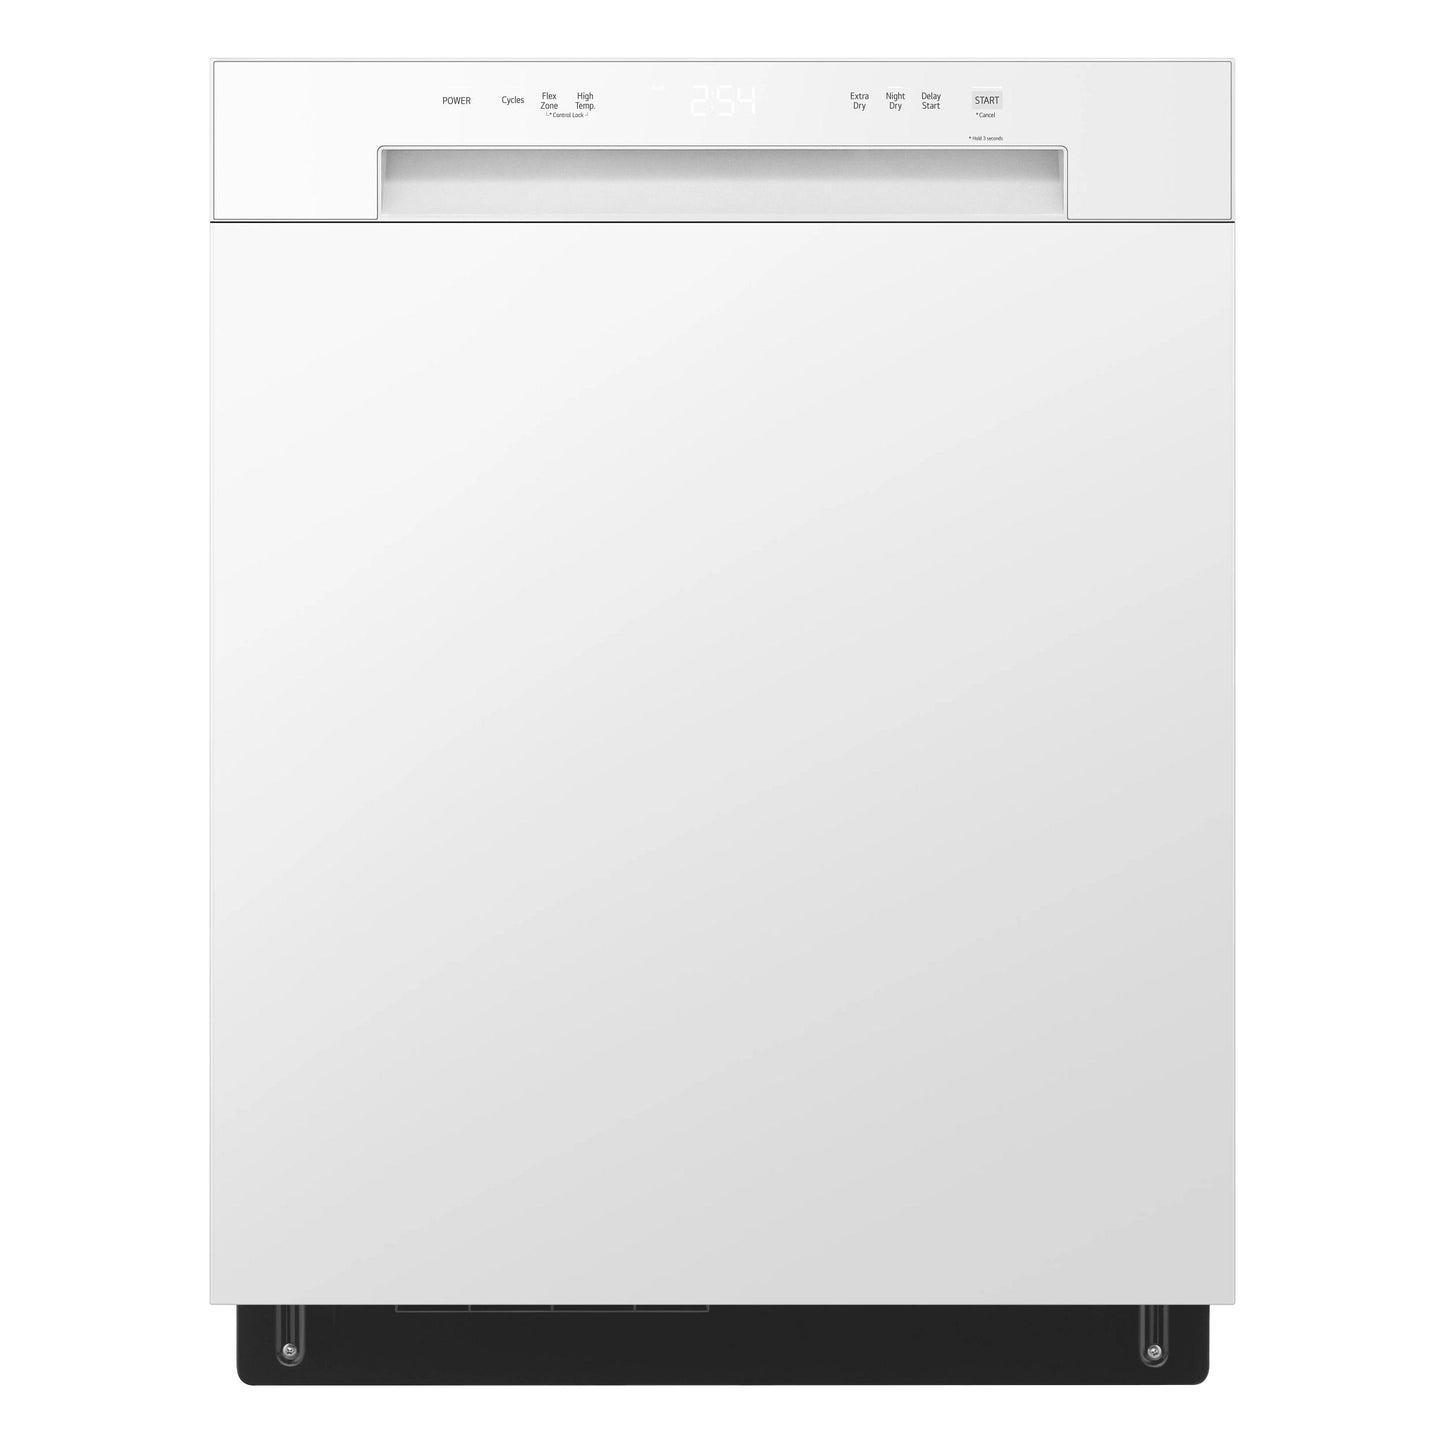 Lg LDFC2423W Front Control Dishwasher With Lodecibel Operation And Dynamic Dry&#8482;